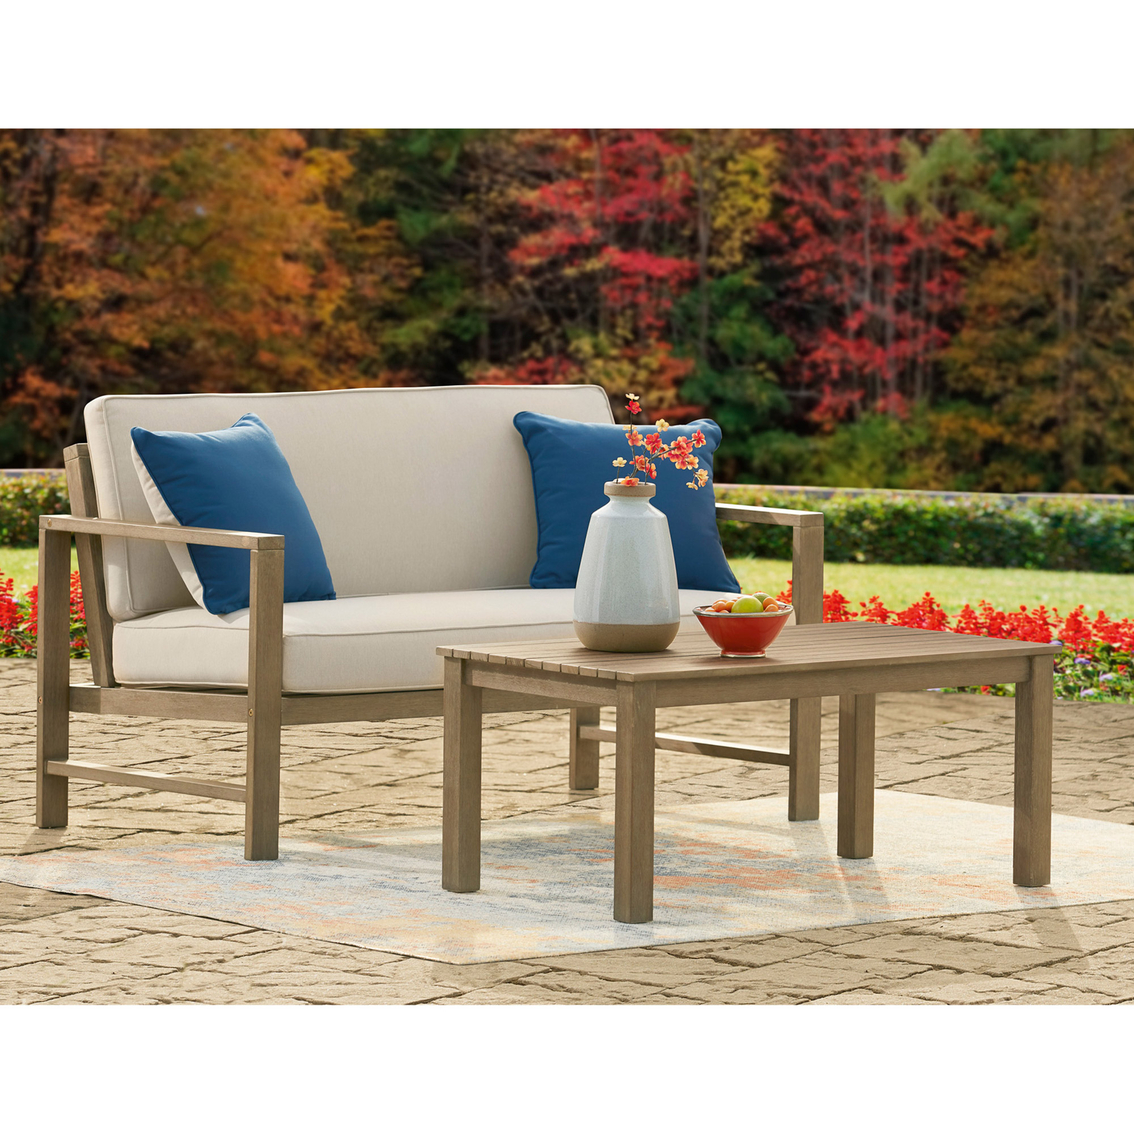 Signature Design by Ashley Fynnegan 4 pc. Outdoor Set - Image 4 of 5